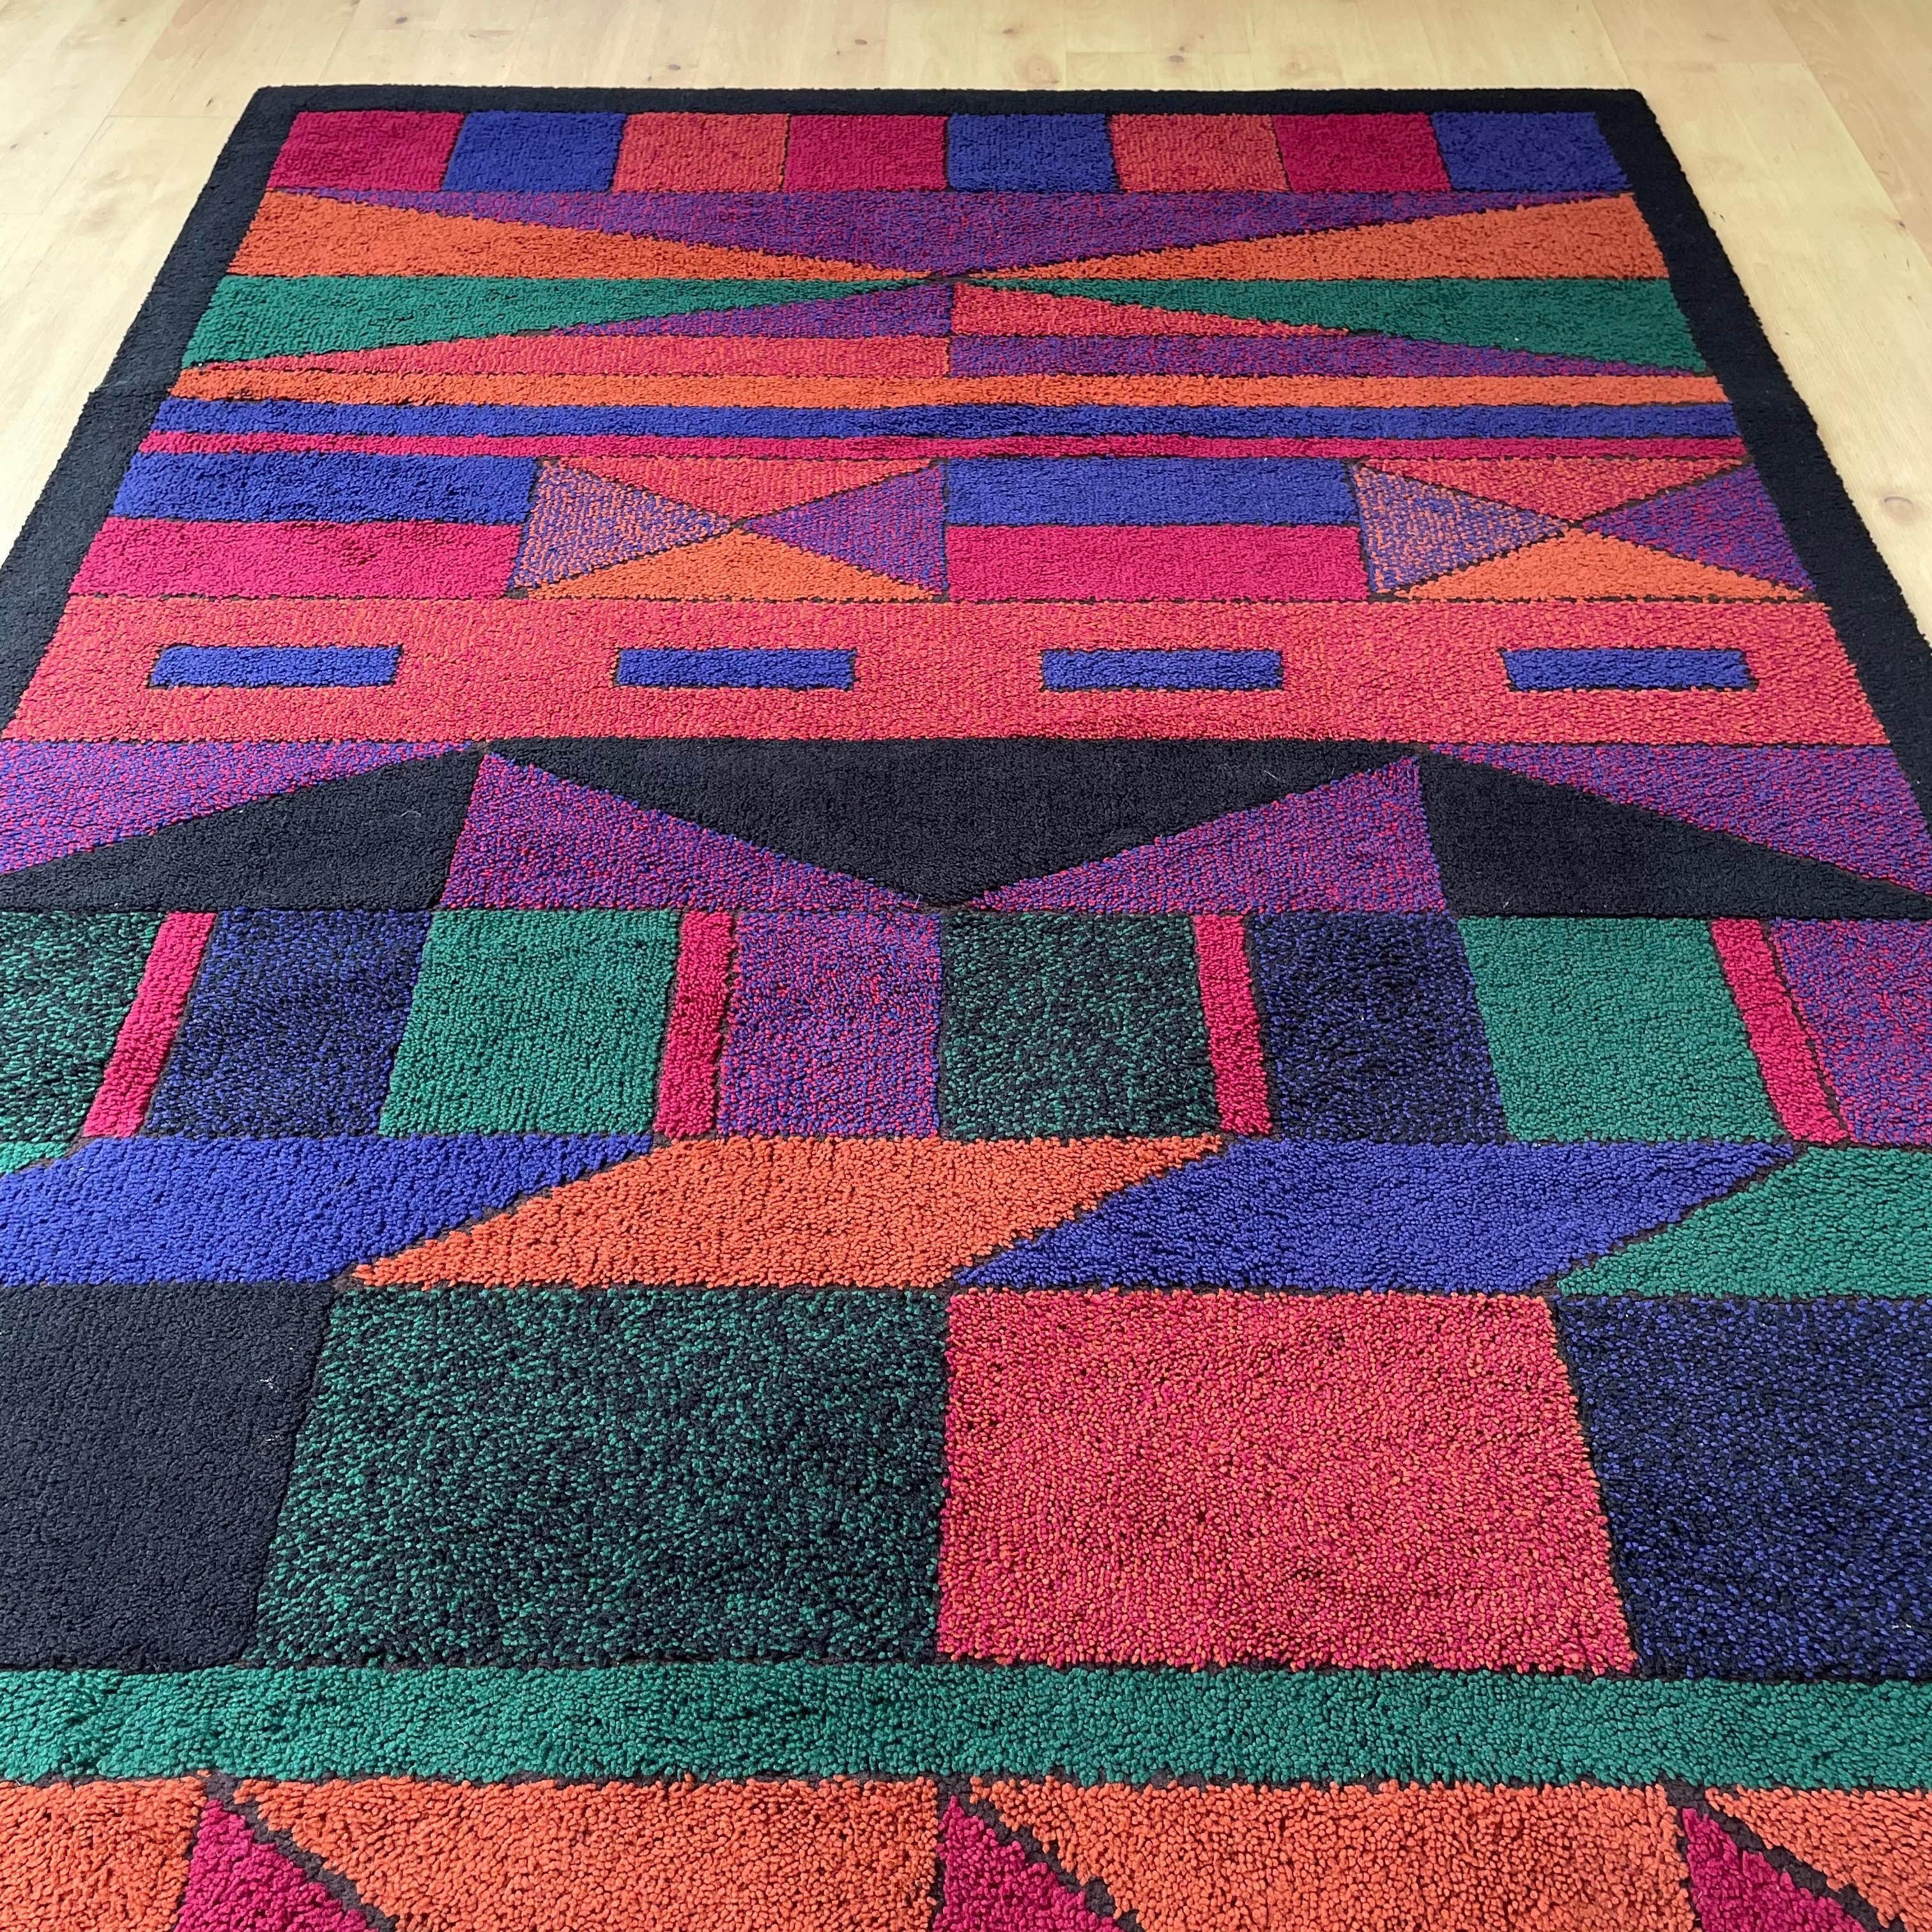 Psychedelic Memphis Style abstract Rug Carpet by Atrium Tefzet, Germany 1980s For Sale 2